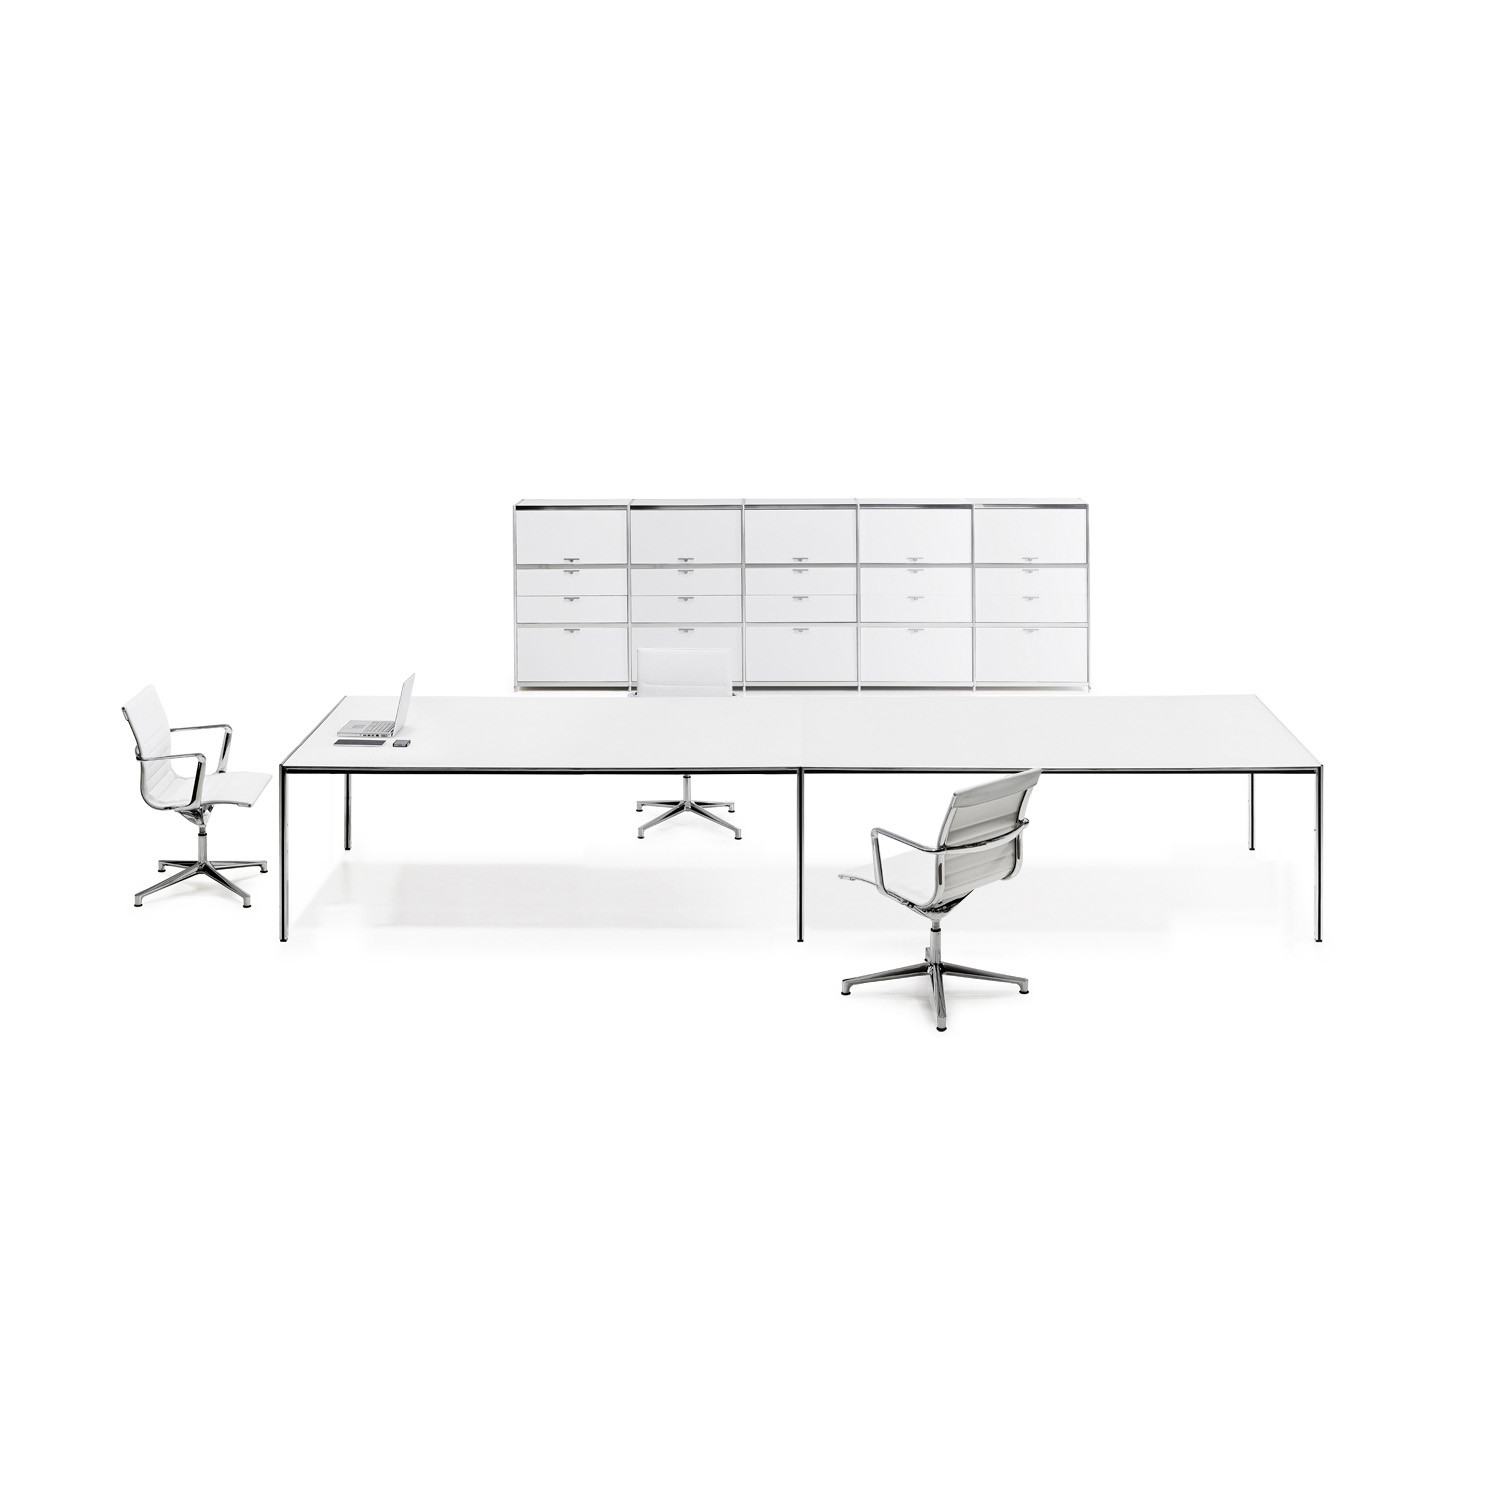 Parallel Group Table by ICF Spa